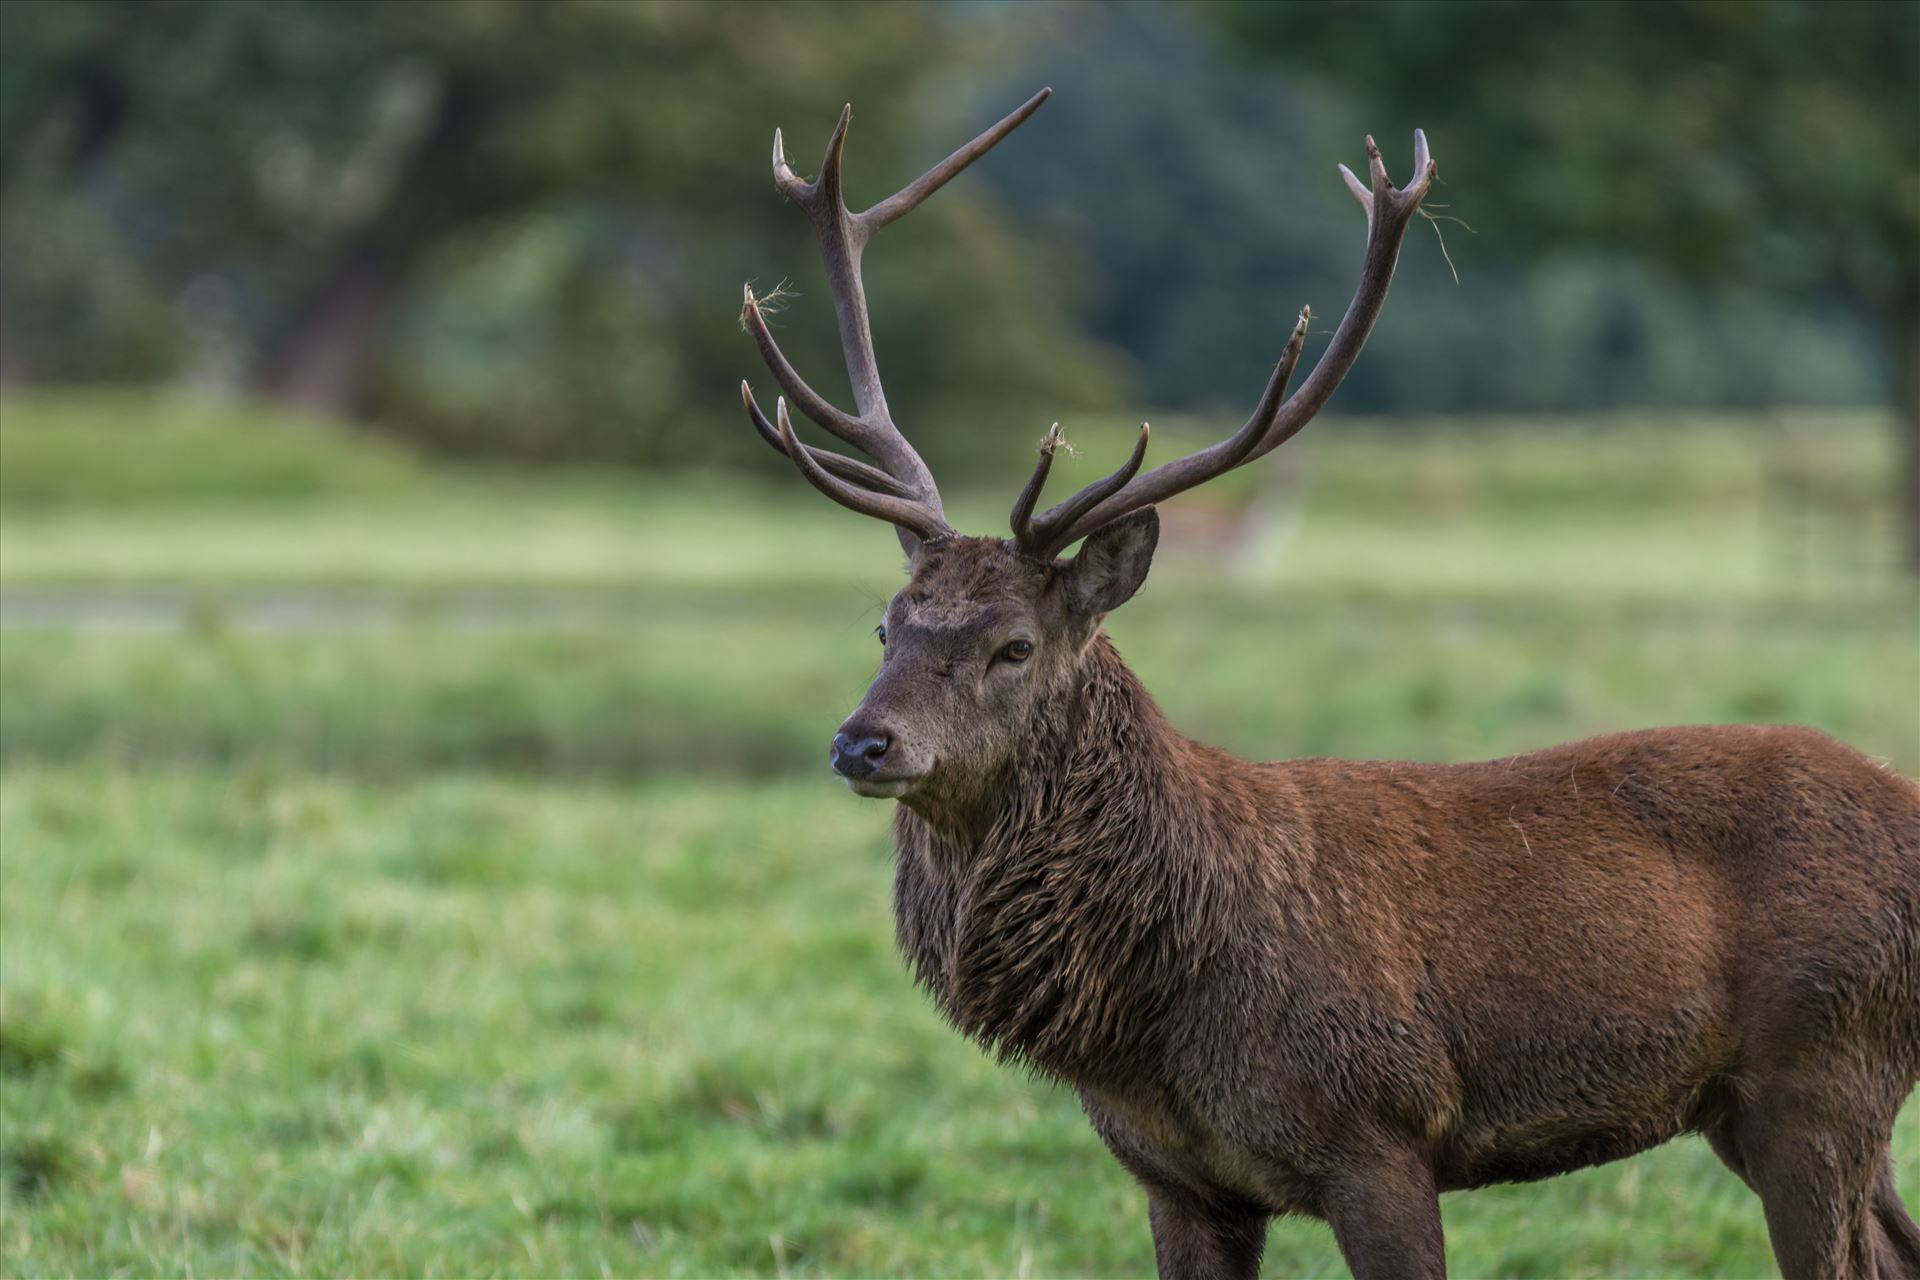 Red deer stag Taken at Studley Royal deer park, nr Fountains Abbey, Ripon. by philreay